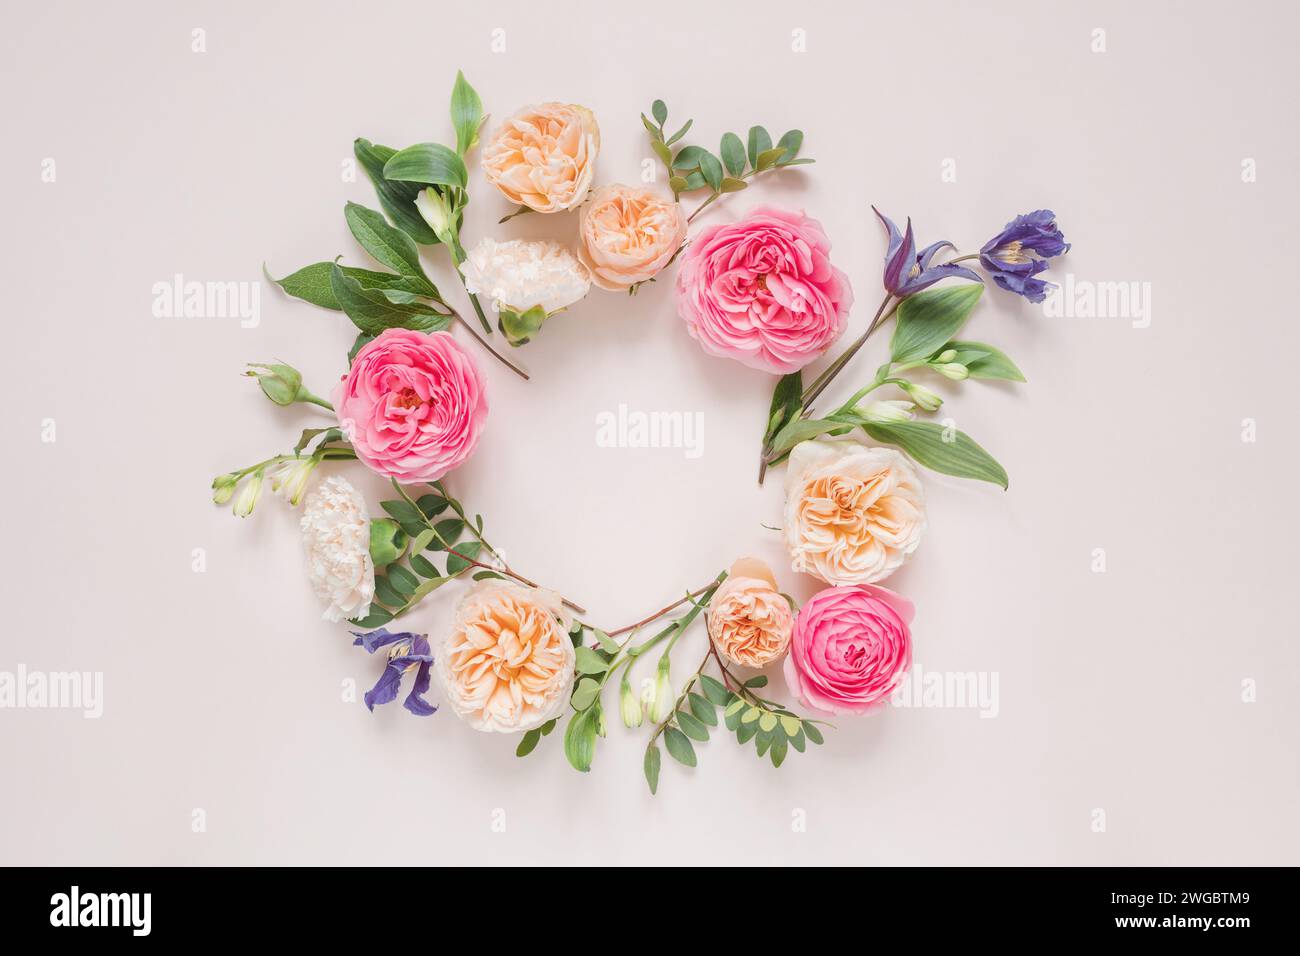 Overhead view of a circular Floral arrangement of roses, chrysanthemums, alstroemeria flowers and foliage on a pink background Stock Photo